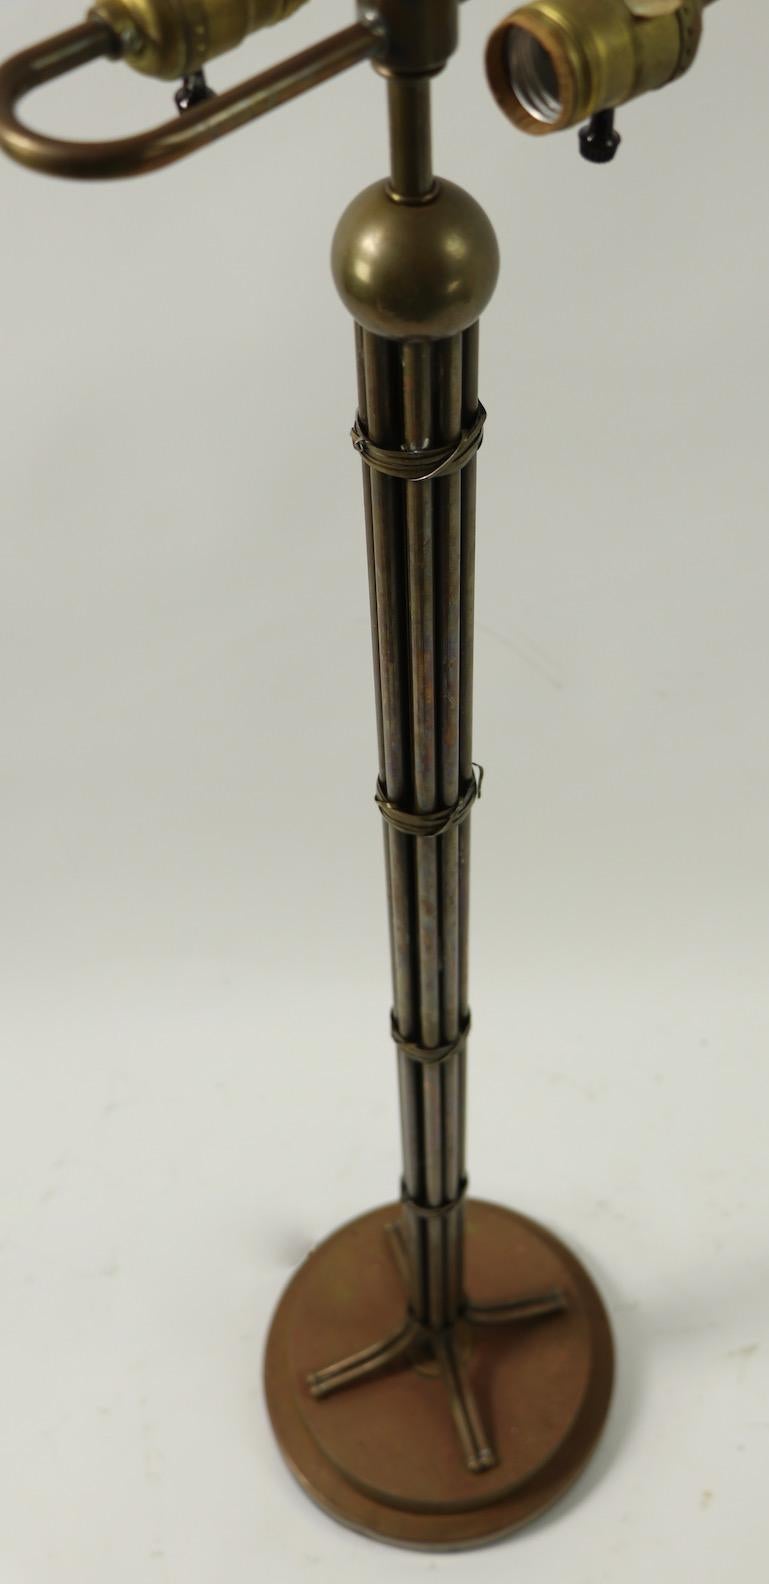 Classic gathered rod form brass, copper and bronze floor lamp signed Hart Associates. The lamp has two sockets at the top, each having its own individual on / off switch, each accepts standard size screw in bulbs. The lamp is in very good original